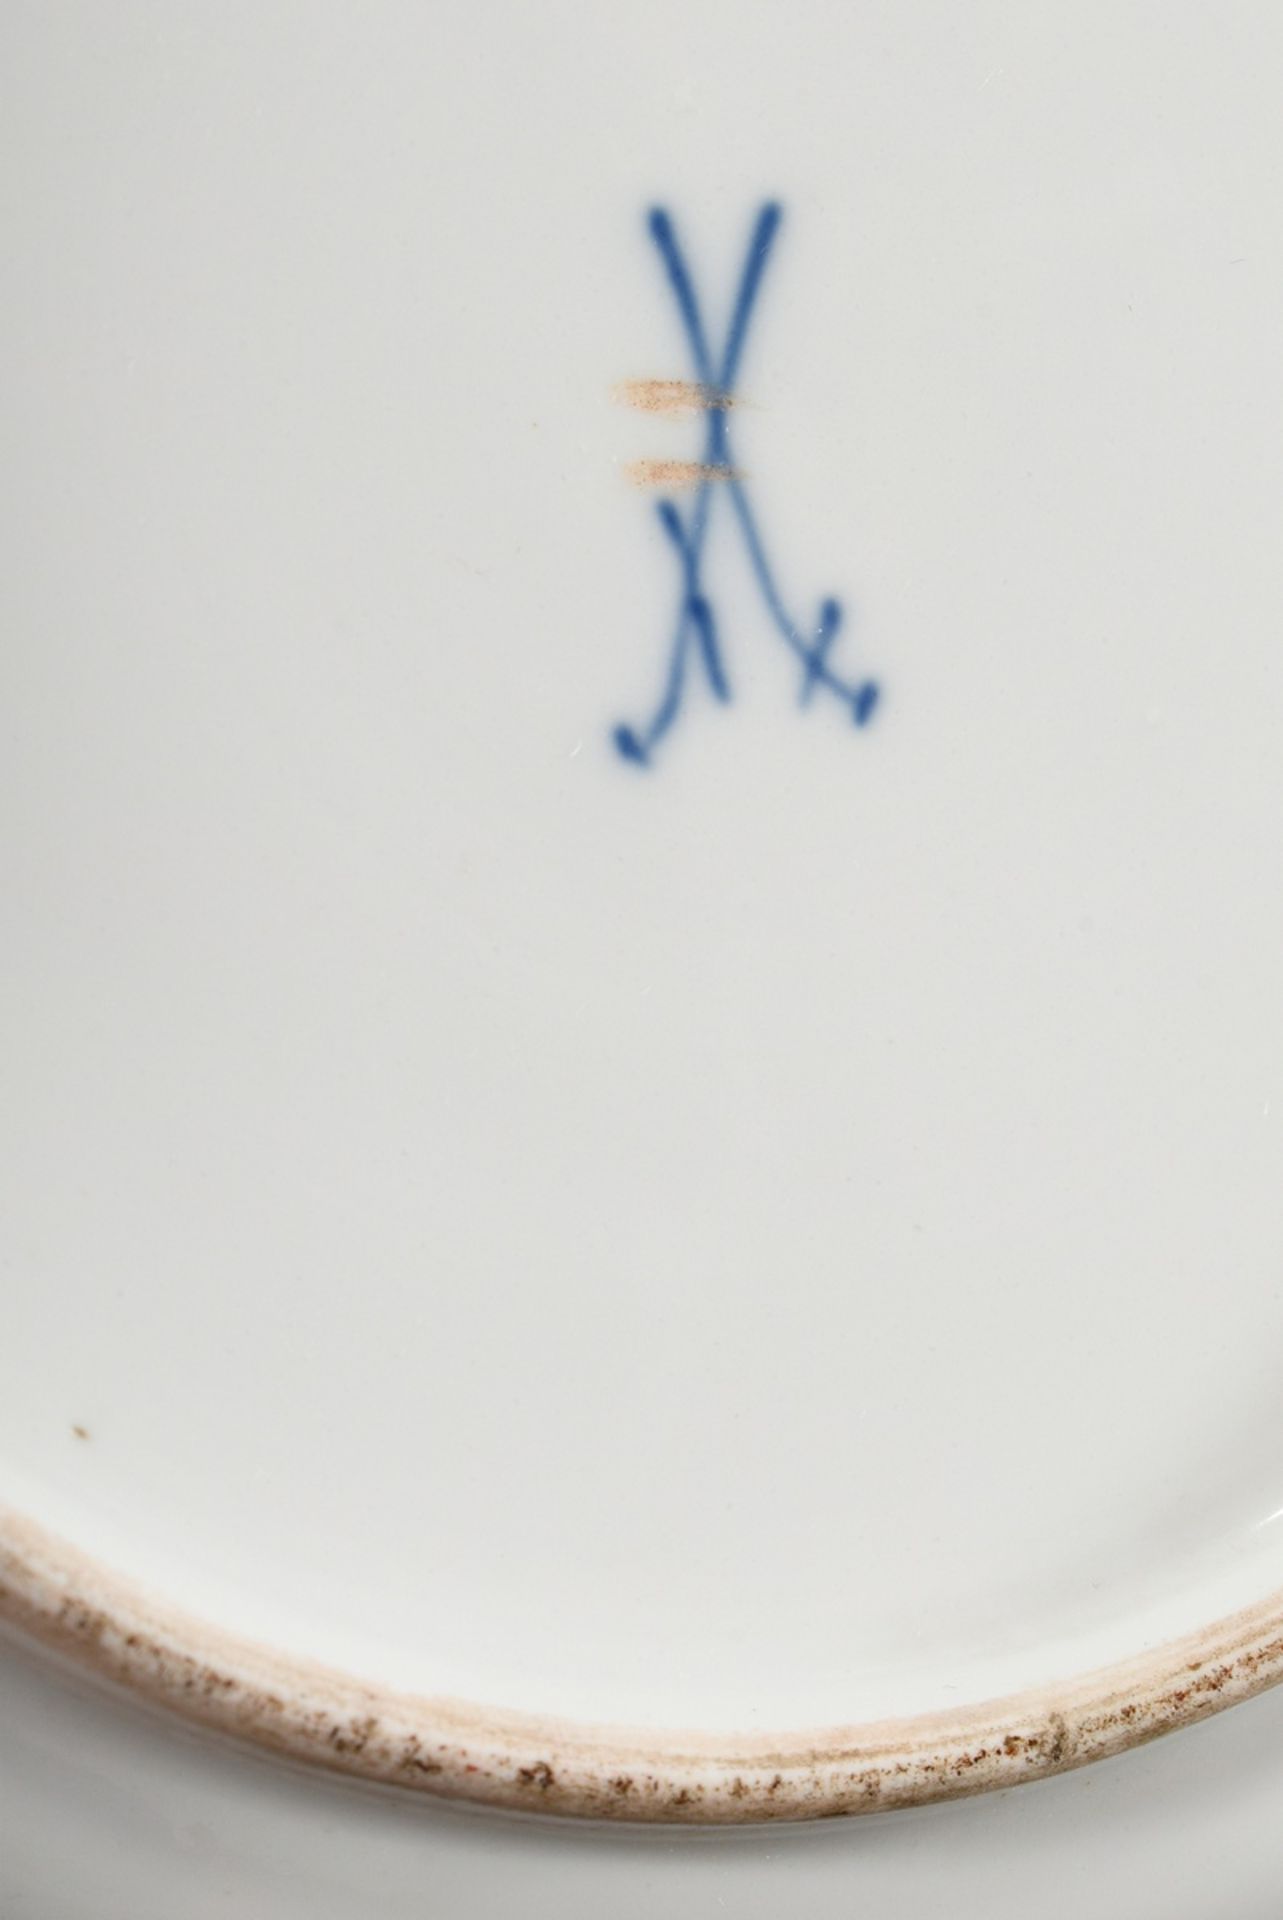 Meissen plate "Lovers" with watteau painting on rosé fond, probably house painting, Ø 23cm, 19th c. - Image 3 of 6